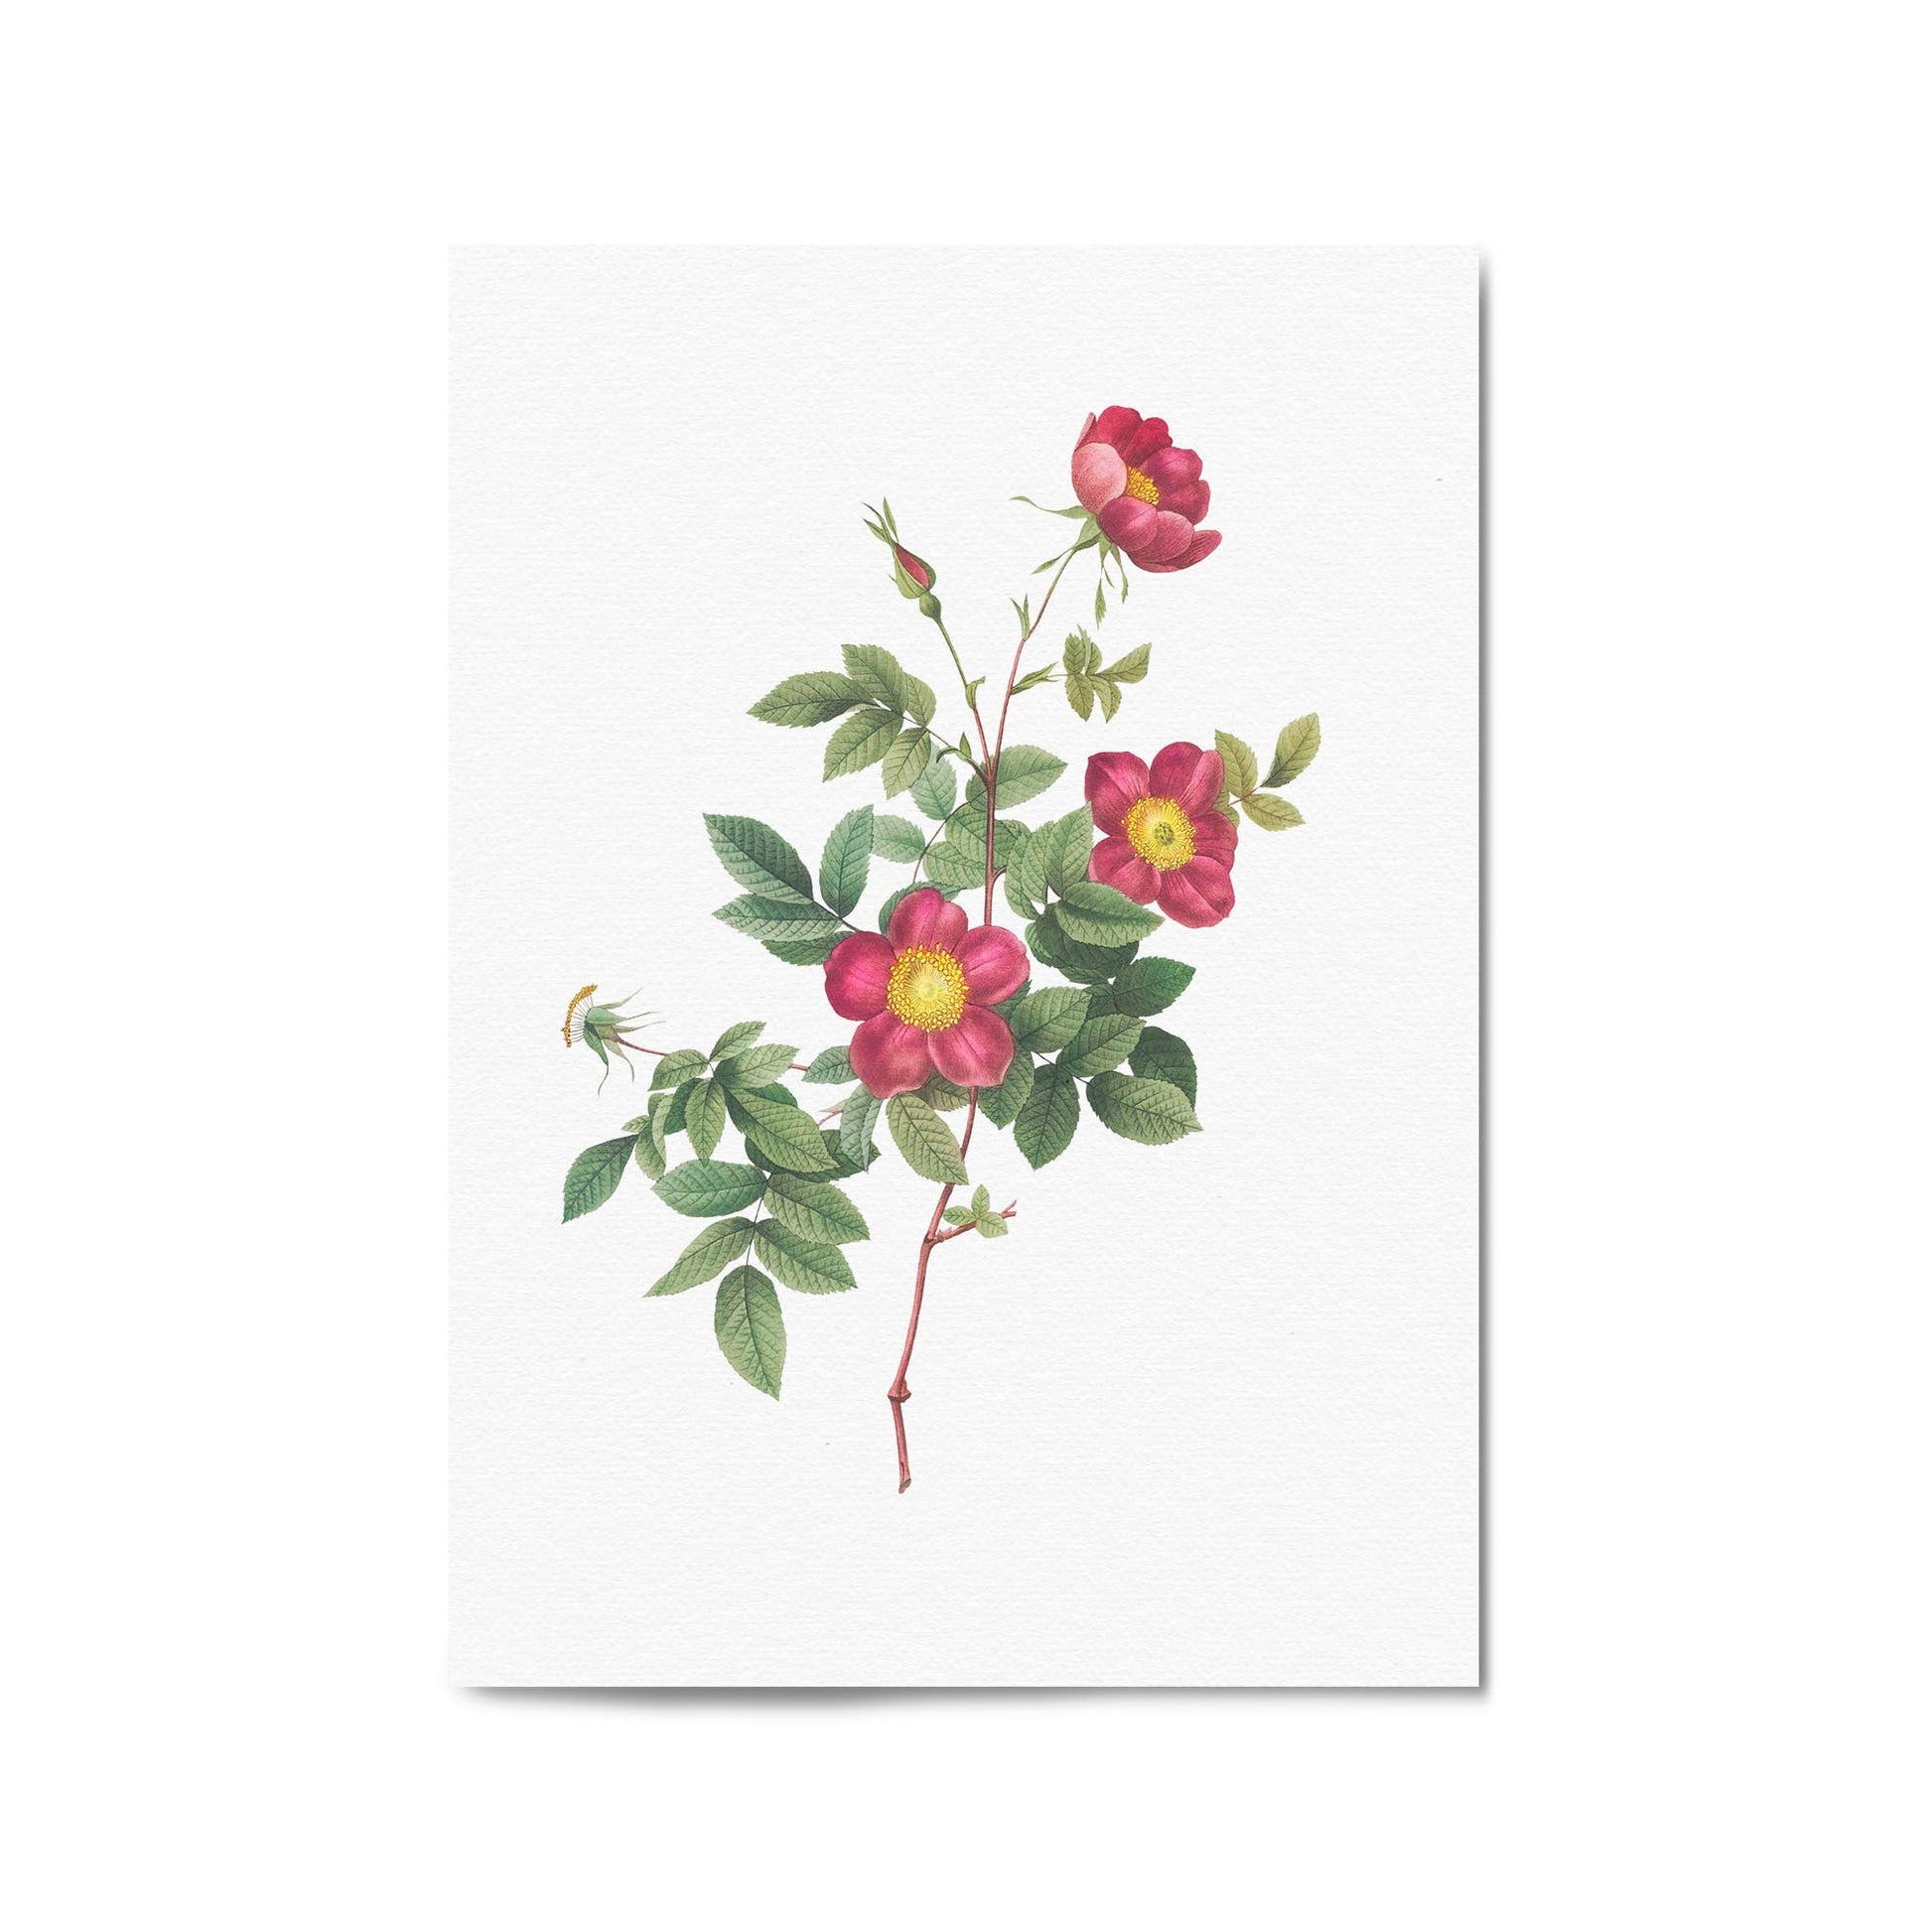 Flower Botanical Painting Kitchen Hallway Wall Art #7 - The Affordable Art Company